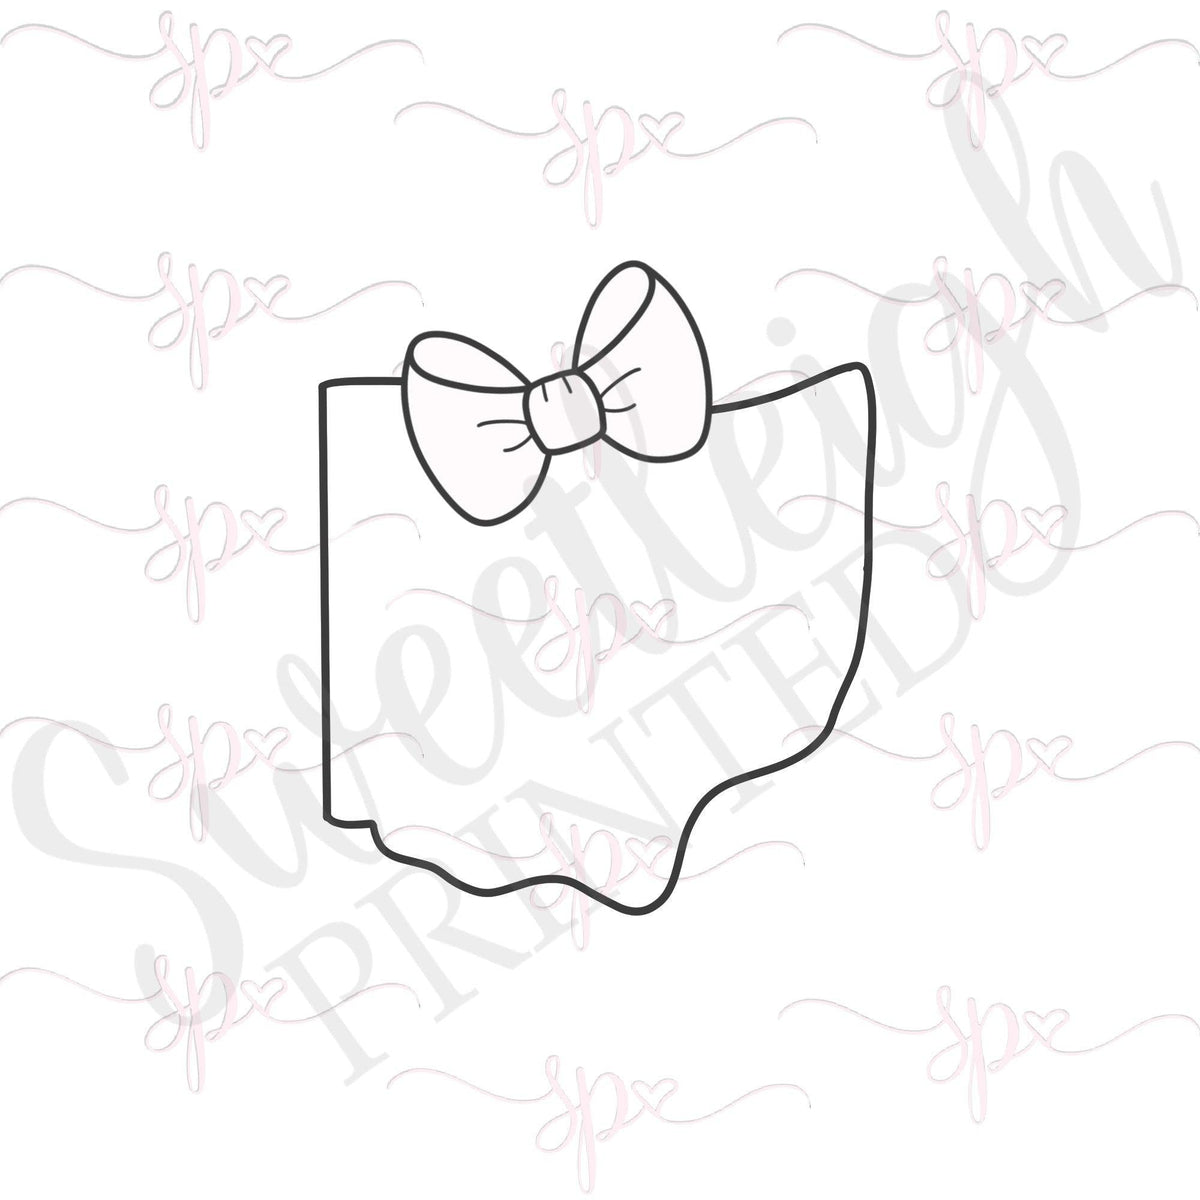 Girly Ohio 2 Cookie Cutter - Sweetleigh 